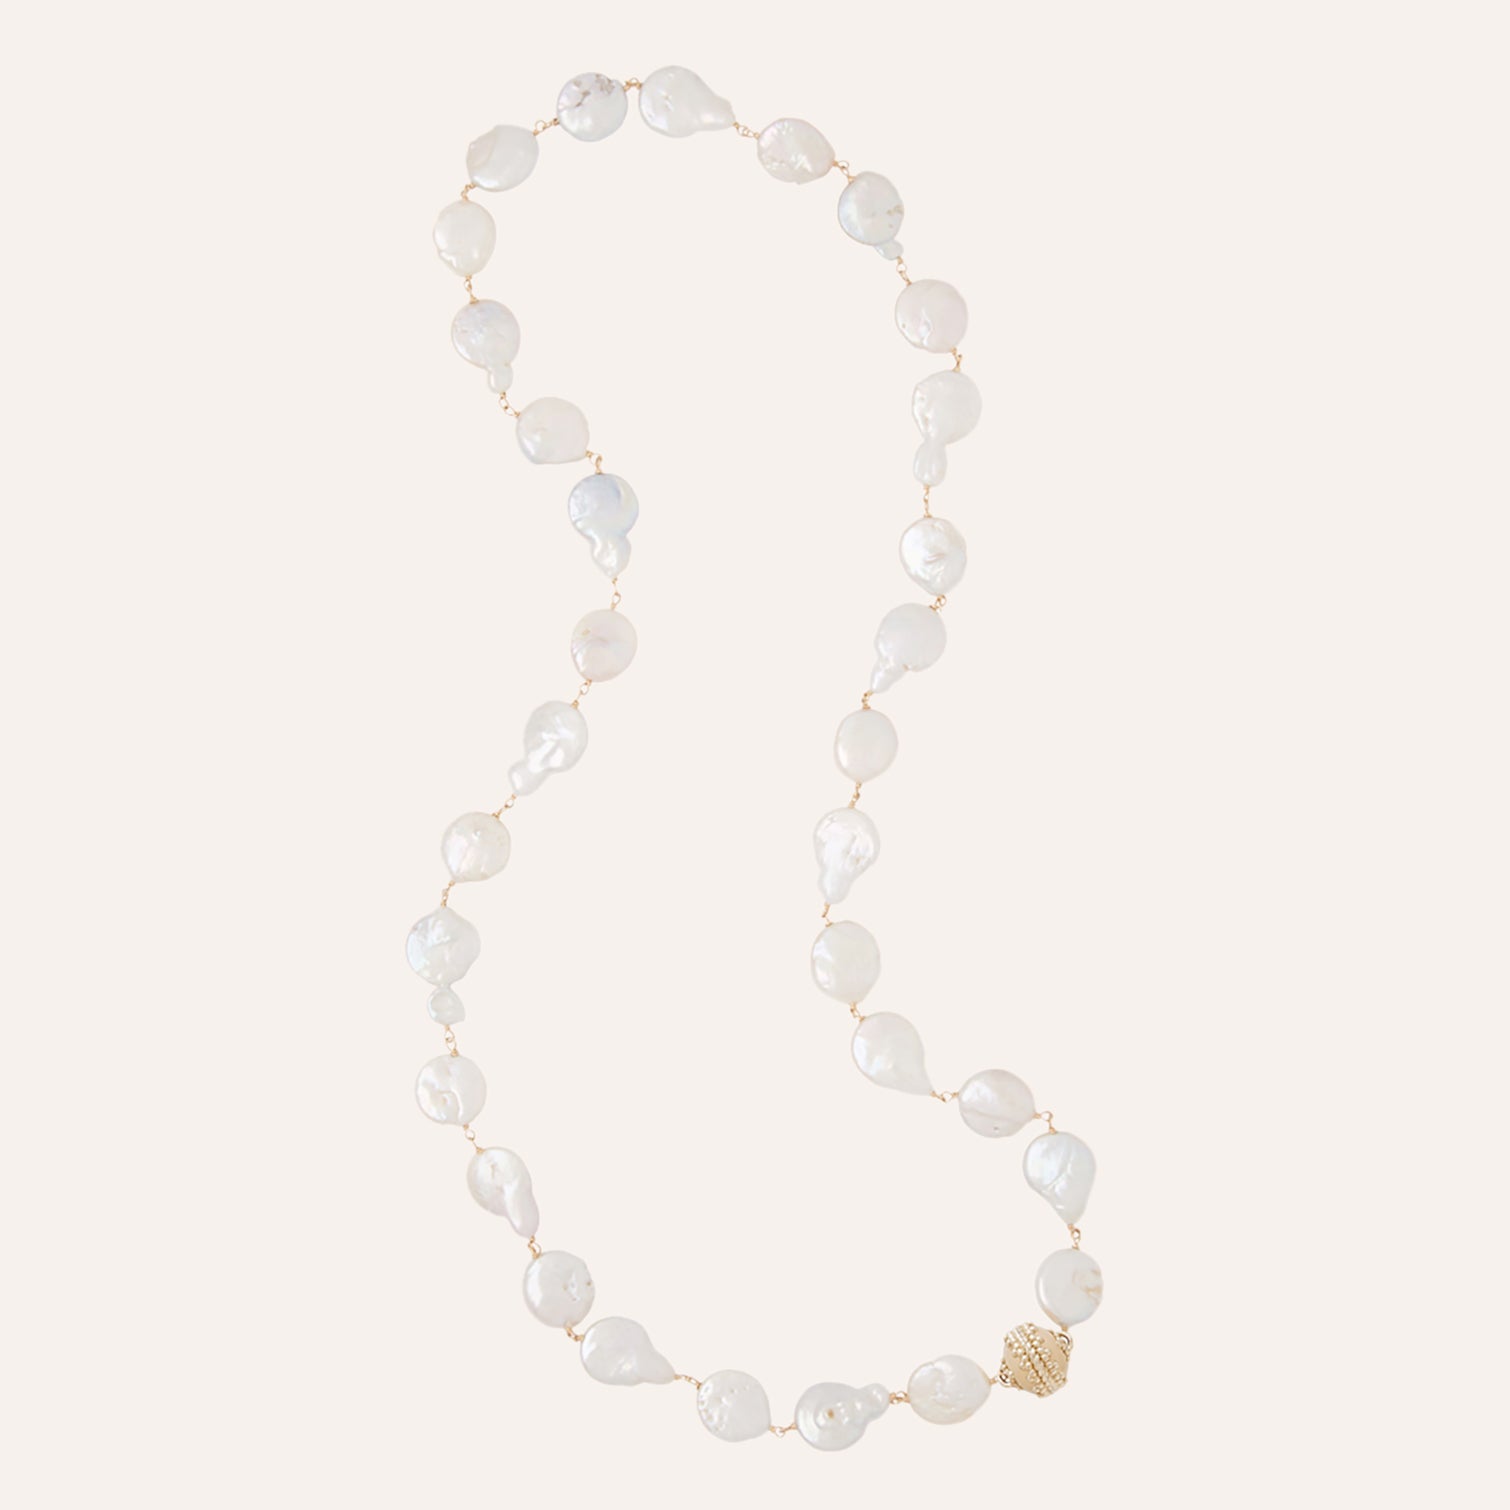 Caspian White Freshwater Coin Pearl 14mm Necklace